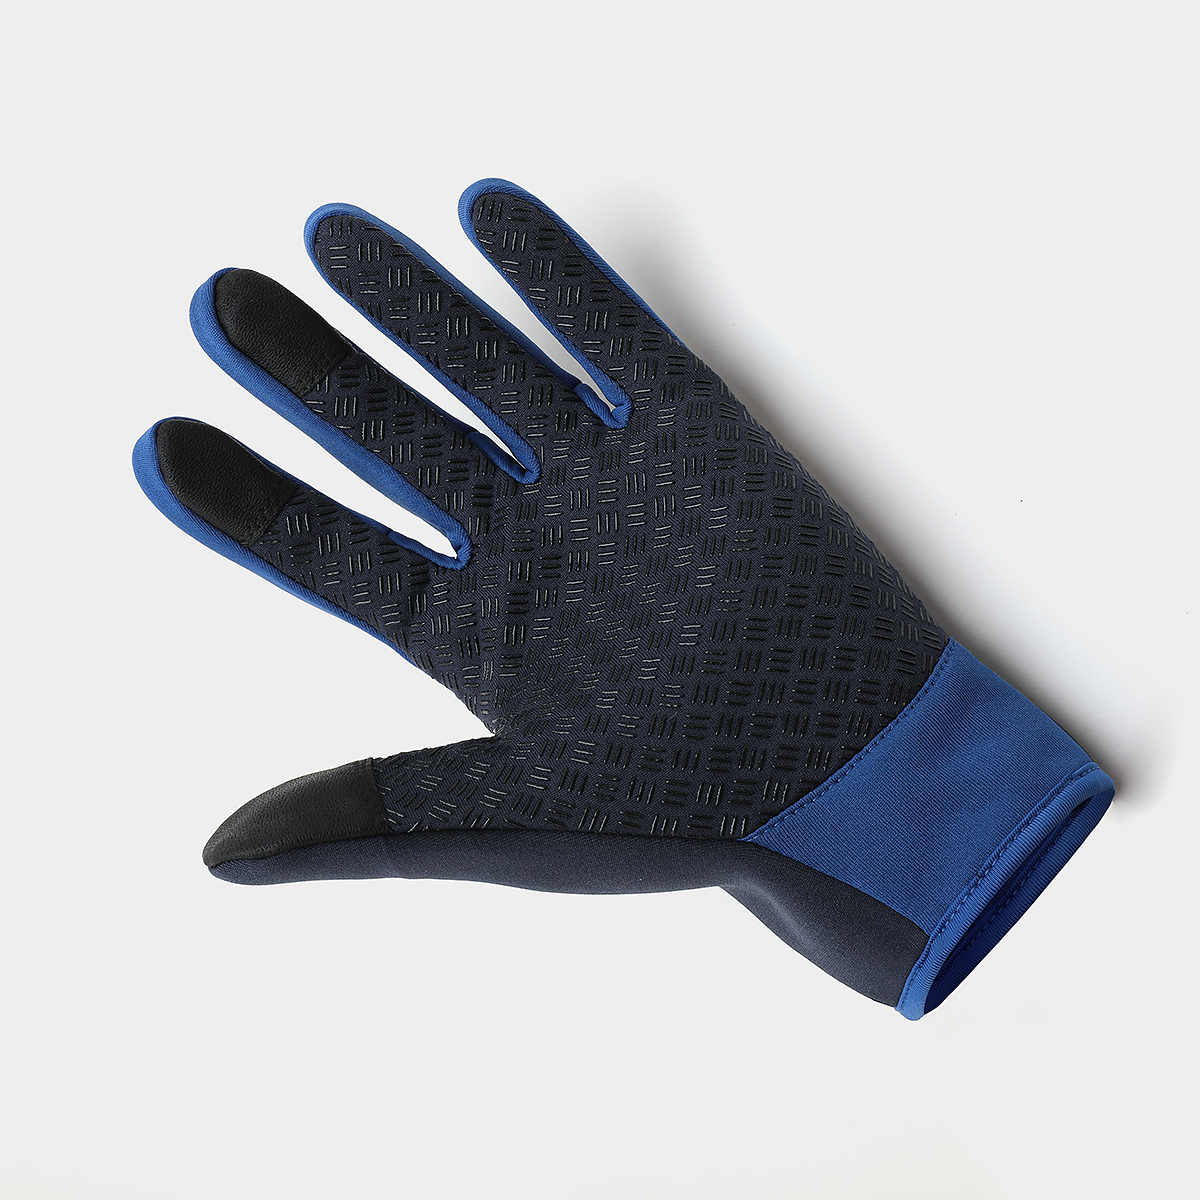 Winter-Warm-Waterproof-Windproof-Anti-Slip-Touch-Screen-Outdoors-Motorcycle-Riding-Gloves-1741940-5